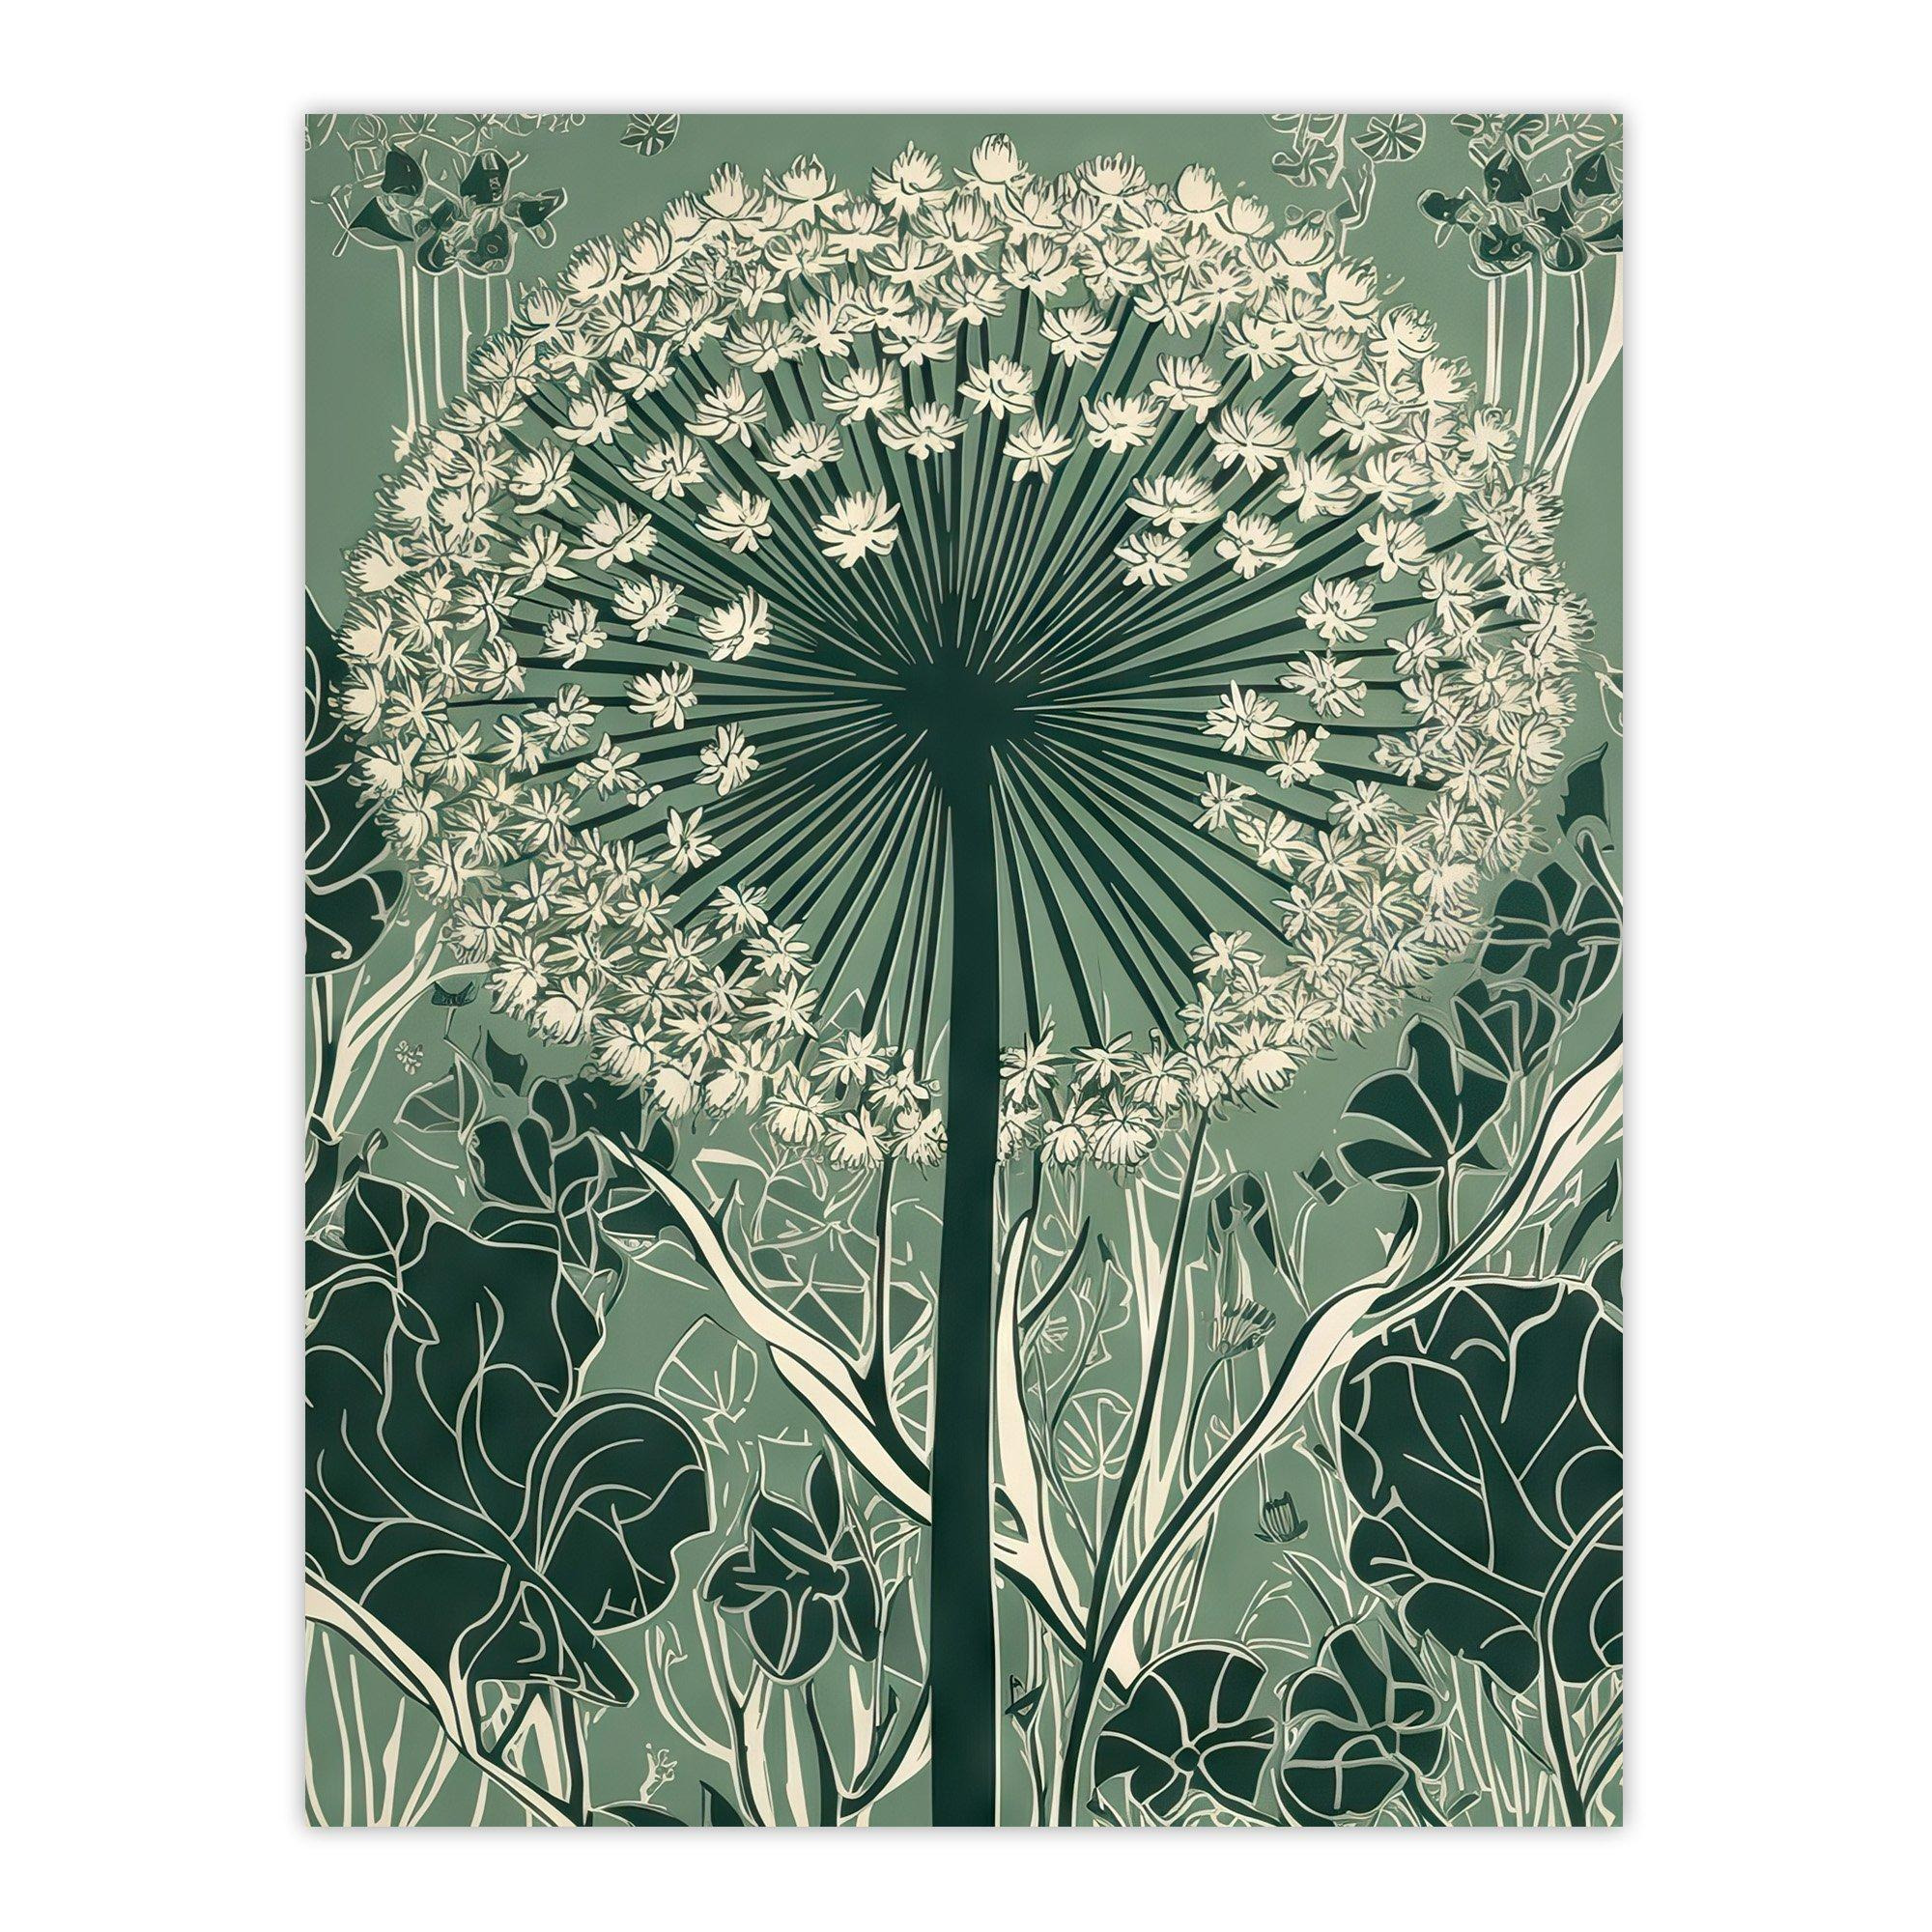 Wall Art Print Single Allium Flower Modern Painting Green White Florets Wildflower Spring Bloom Nature Colourful Bright Floral Modern Artwork Poster - image 1